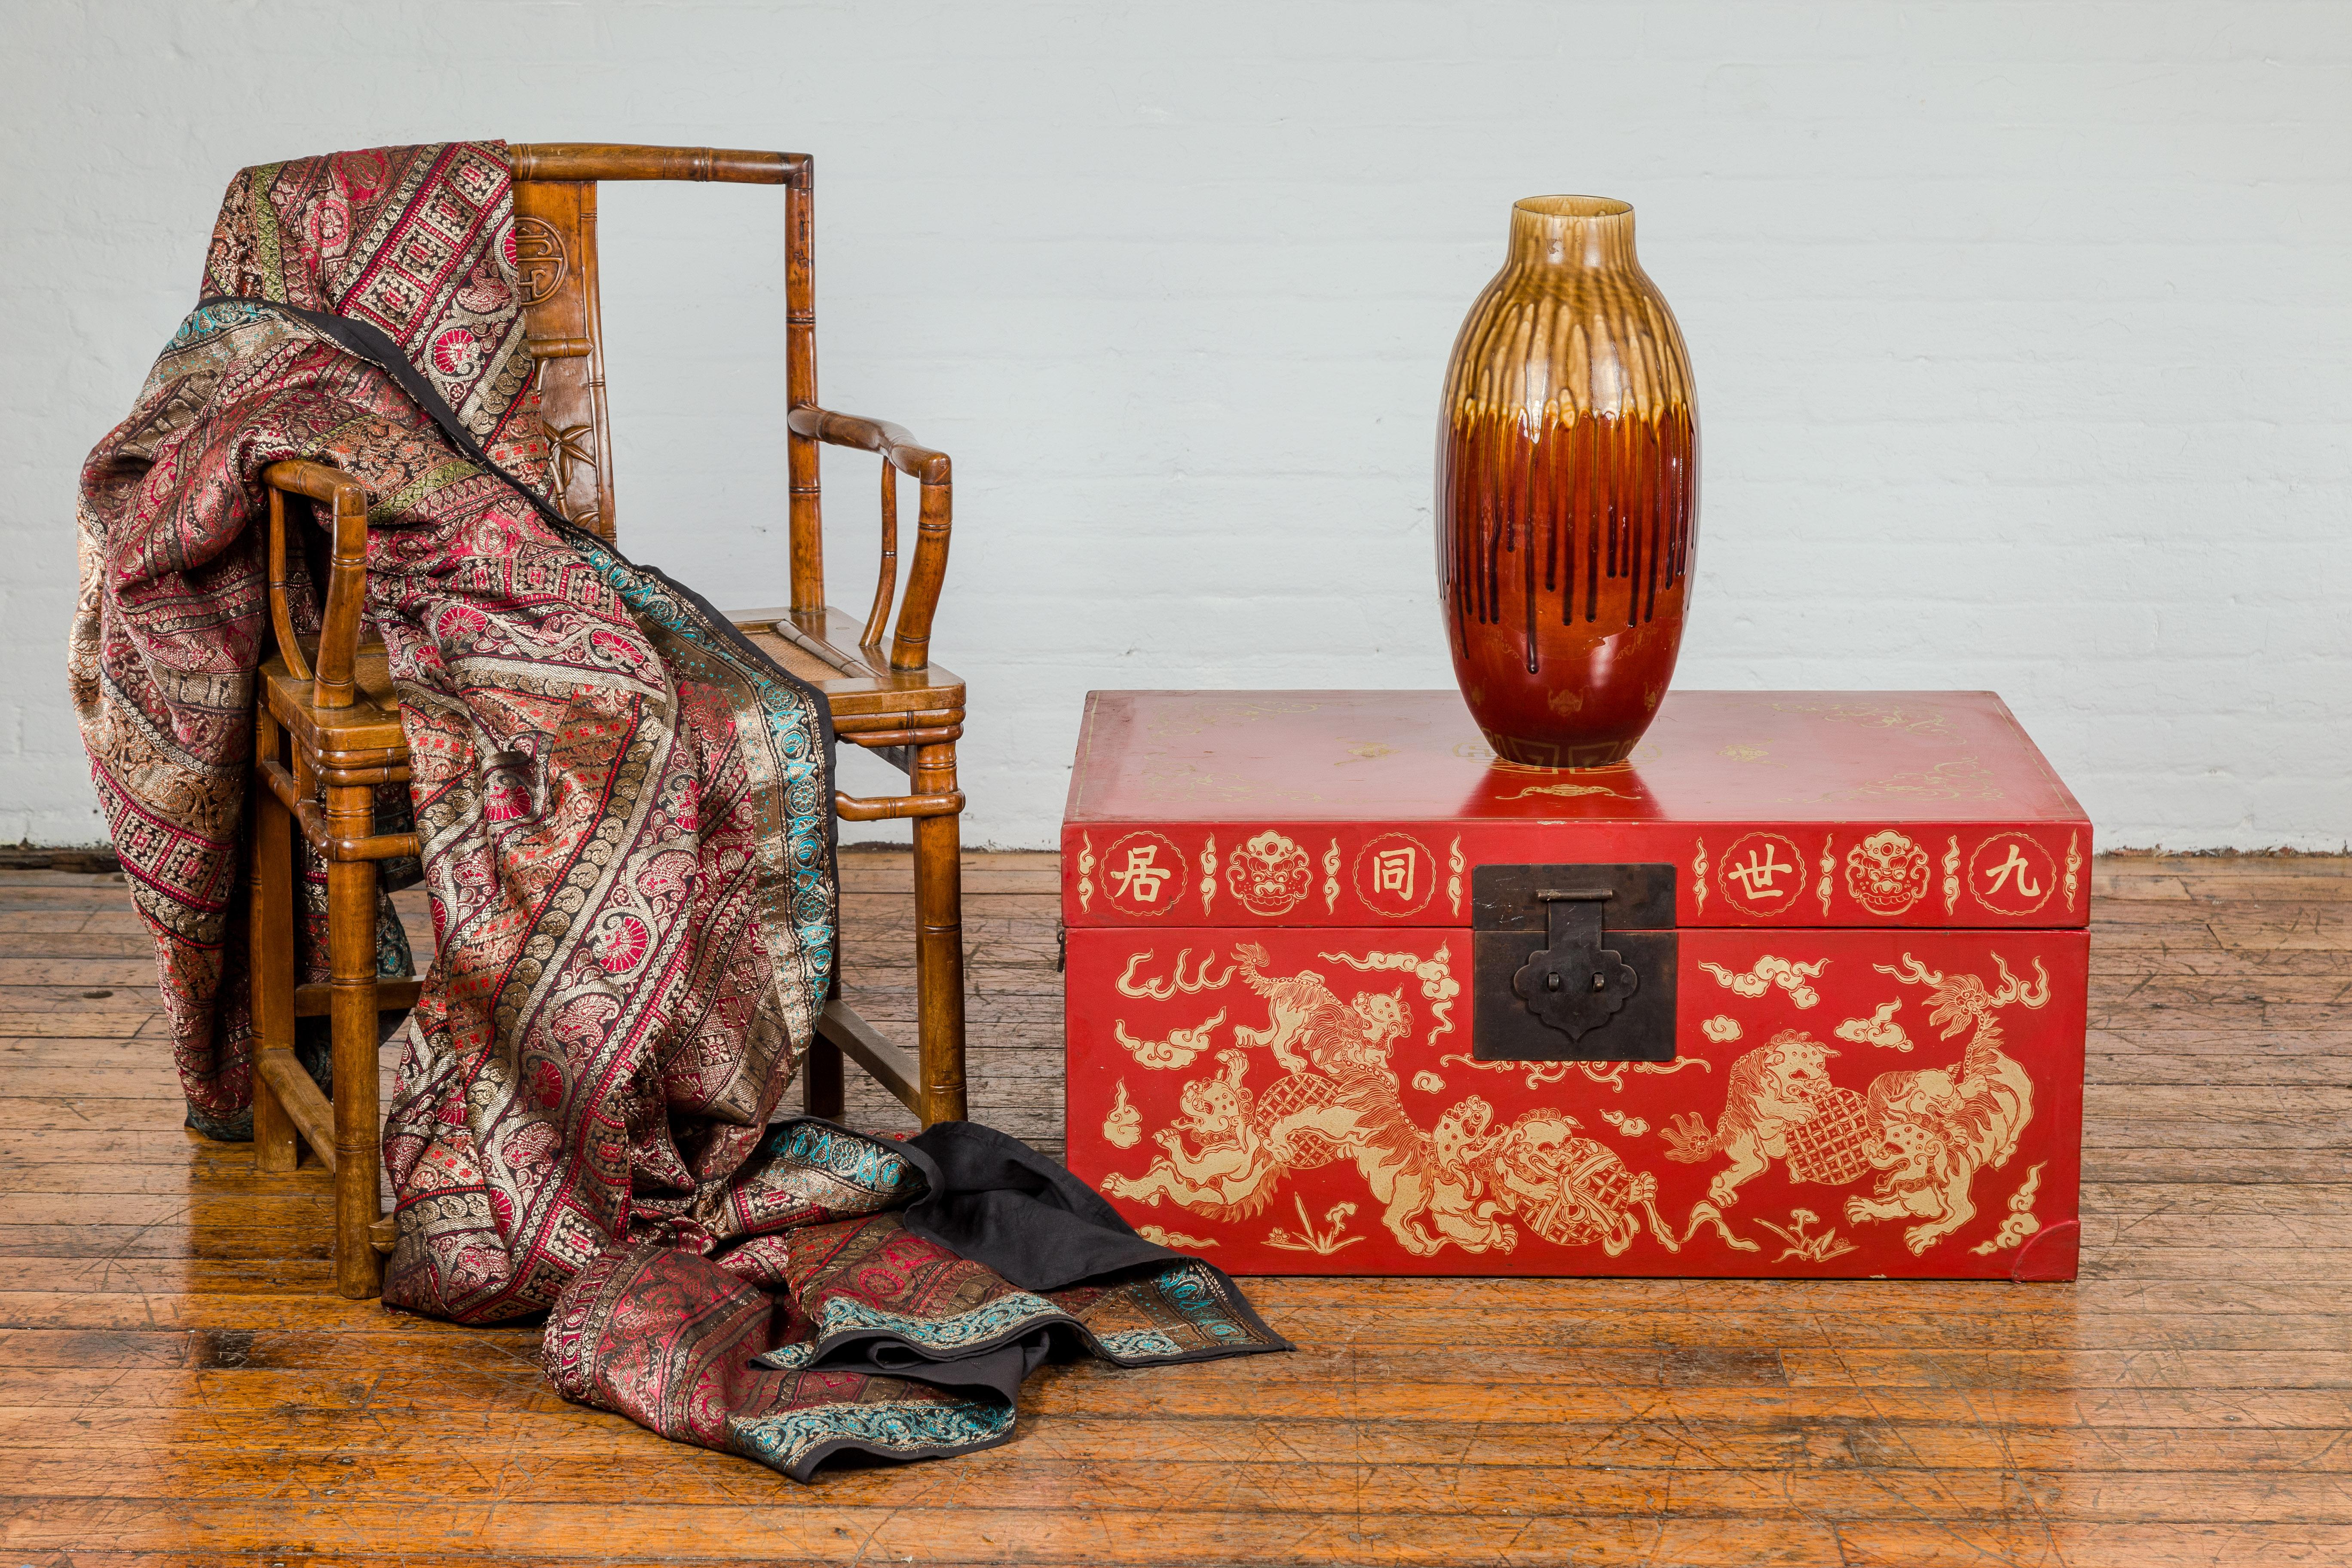 A vintage Chinese red lacquer blanket chest with gilded bat, guardian lions and cloud motifs. This vintage Chinese red lacquer blanket chest is a stunning example of traditional craftsmanship blended with symbolic artistry. The chest is adorned with